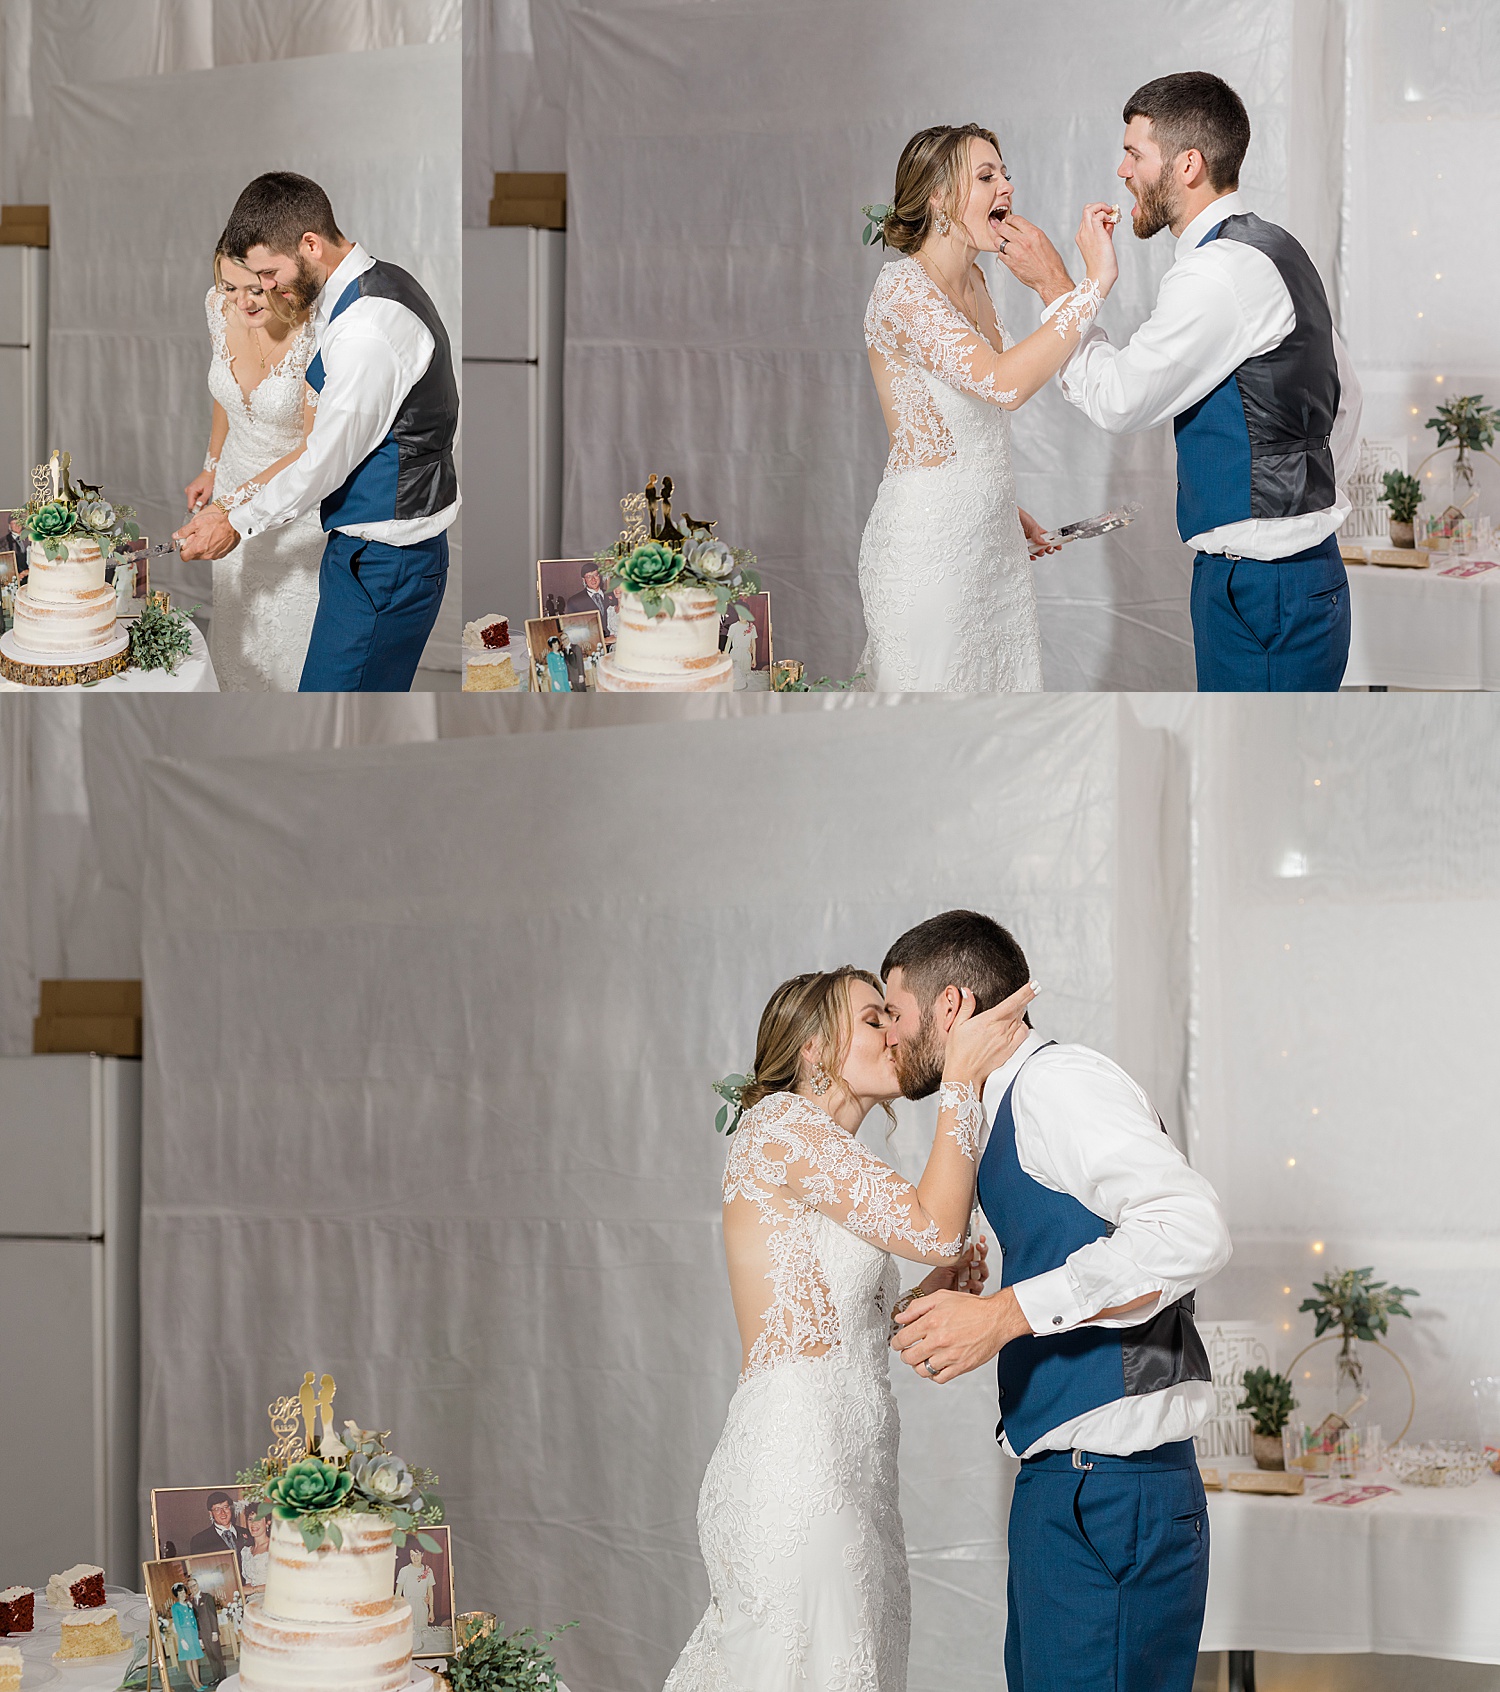 bride and groom cut wedding cake and share kiss at wedding reception 